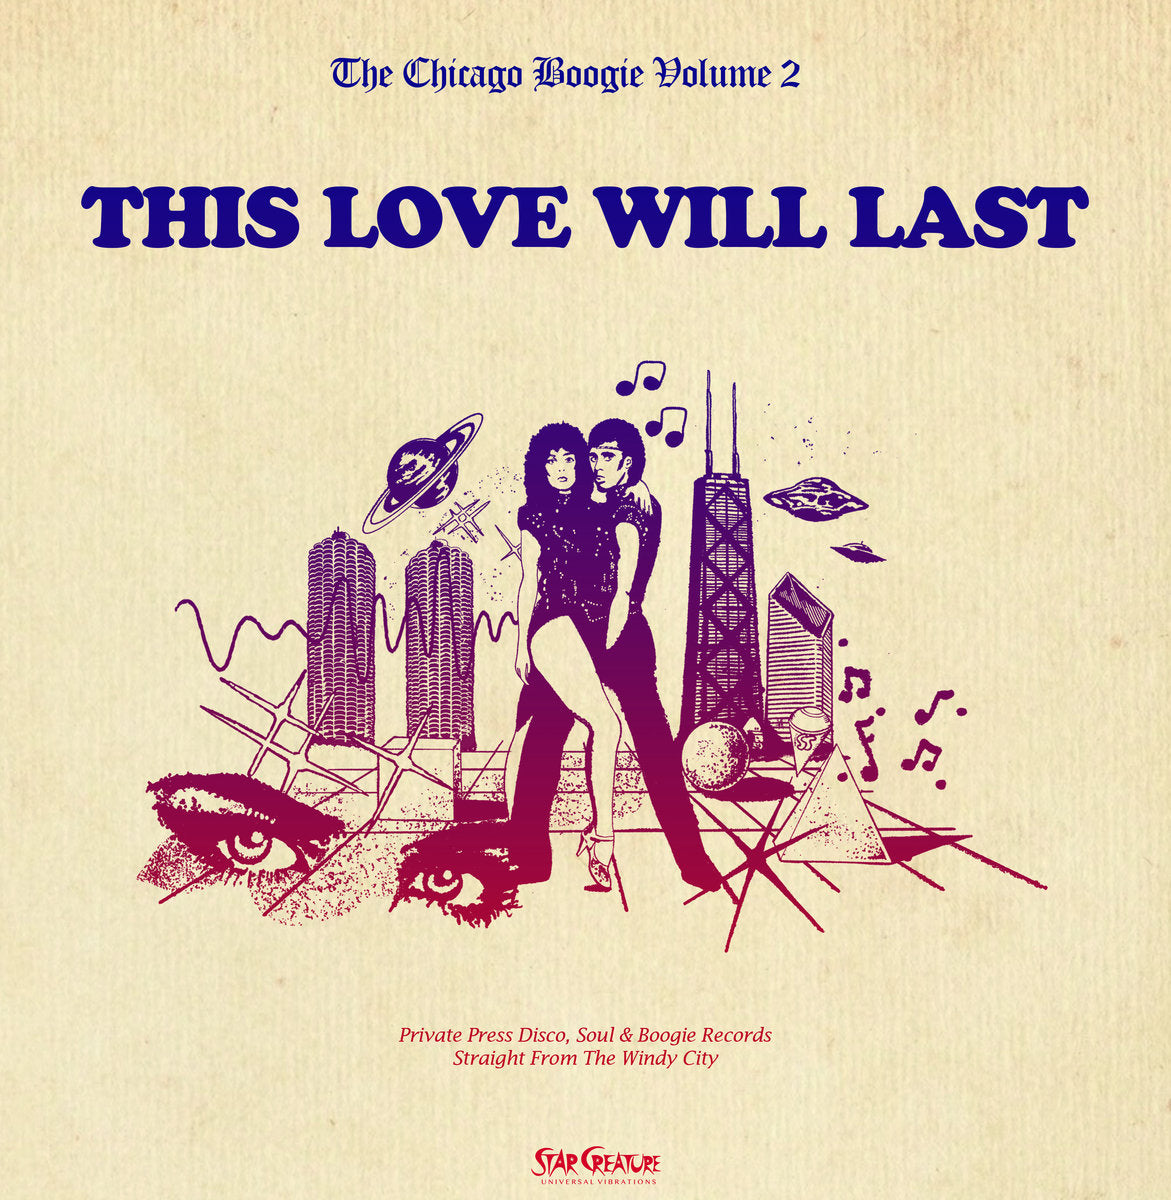 The Chicago Boogie Volume 2: This Love Will Last (New 12")